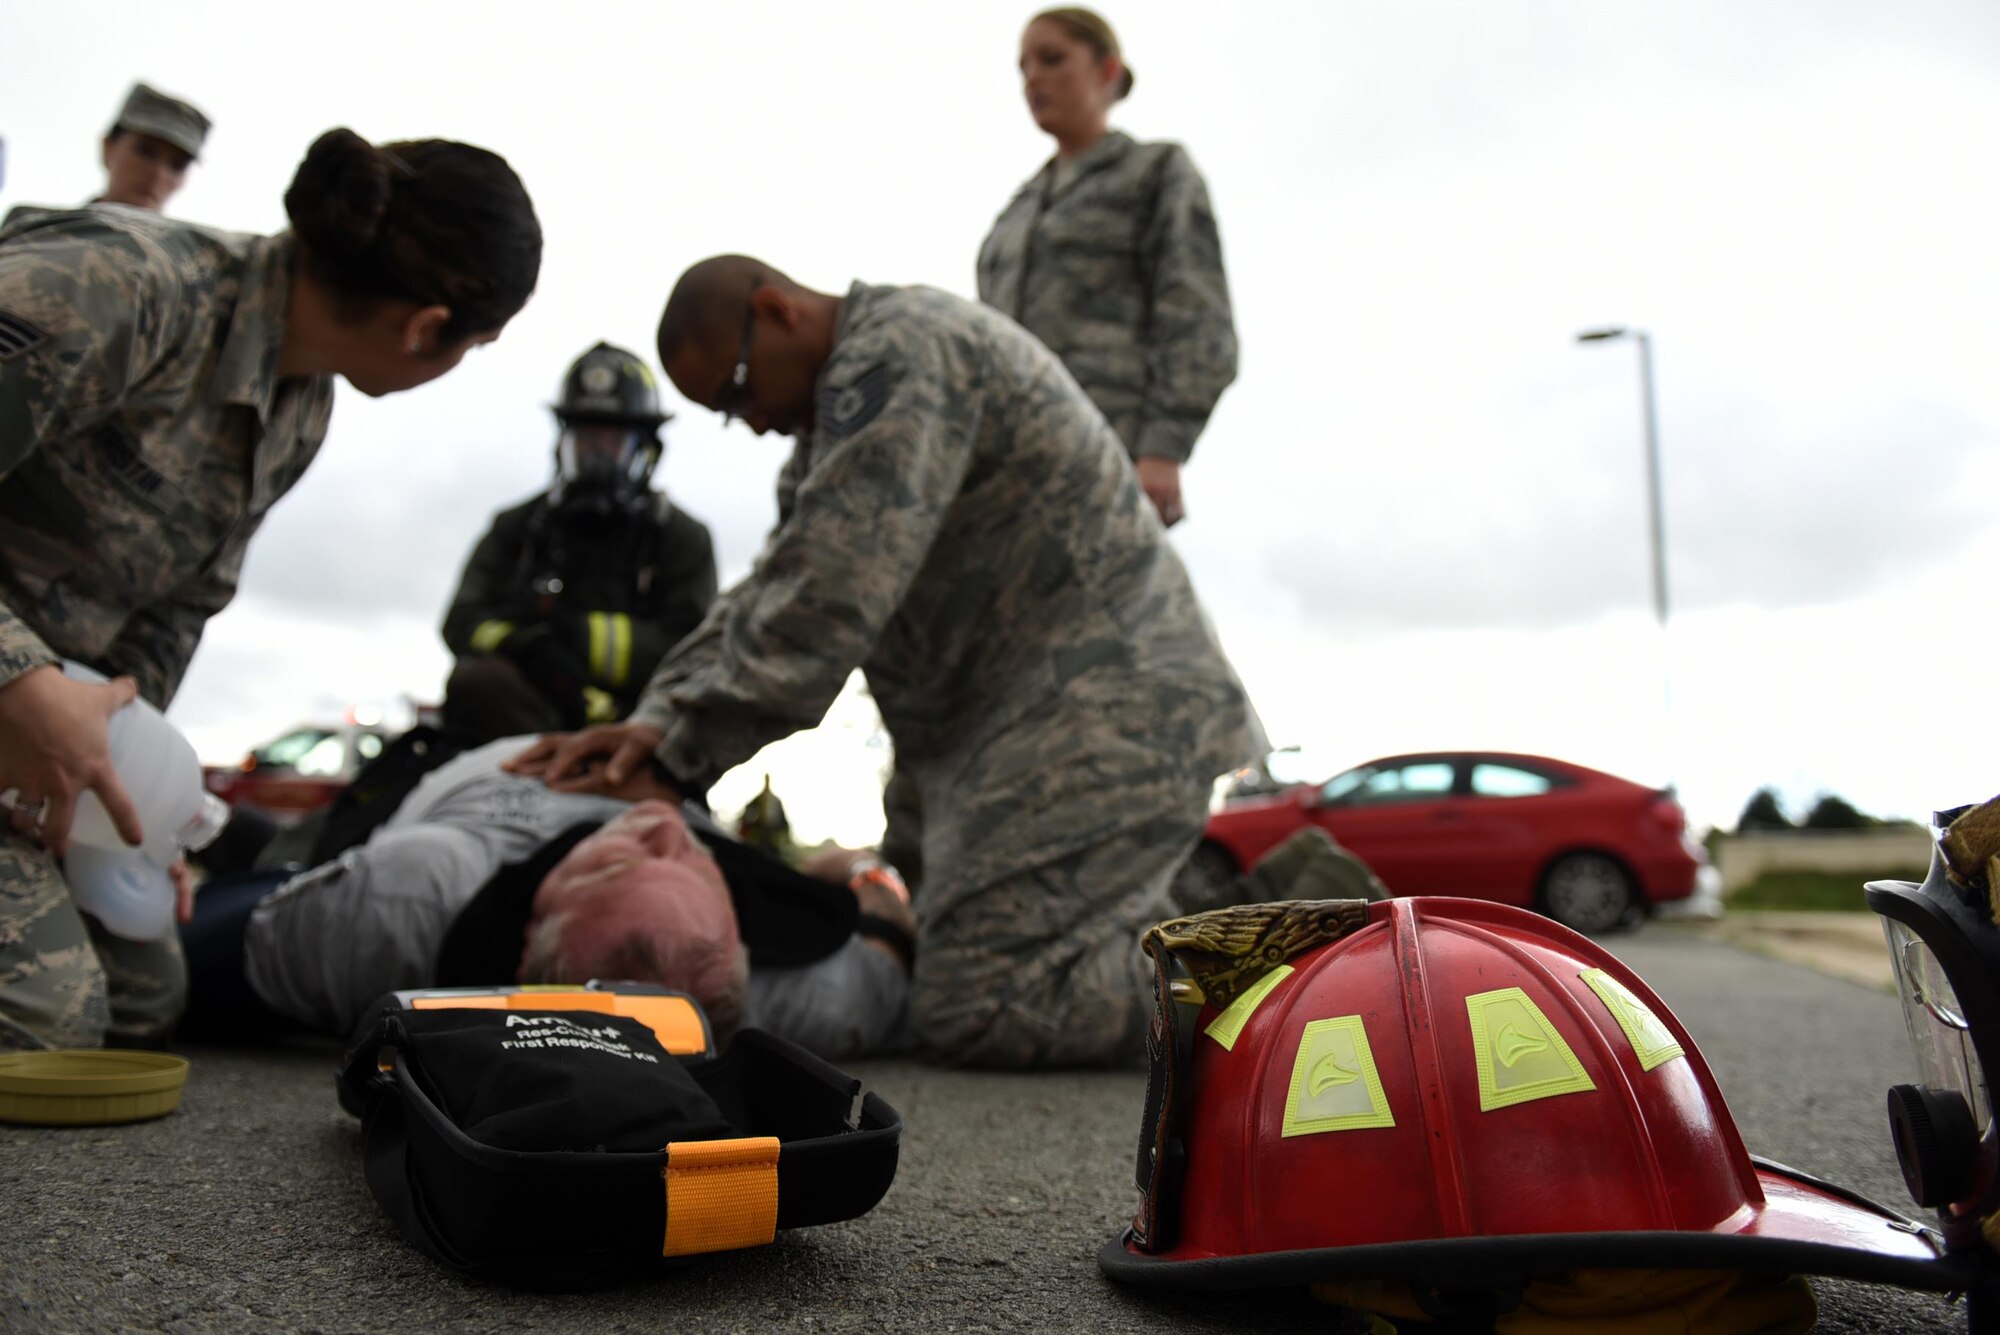 Members of the 19th Aerospace Medicine Squadron perform chest compressions during a major accident response inspection March 30, 2017, at the Jacksonville Fire Department Training Center, Ark. The 19th AMDS response team was responsible for stabilizing patients, checking their vitals, and coordinating transfers to the emergency room. (U.S. Air Force photo by Airman 1st Class Kevin Sommer Giron)